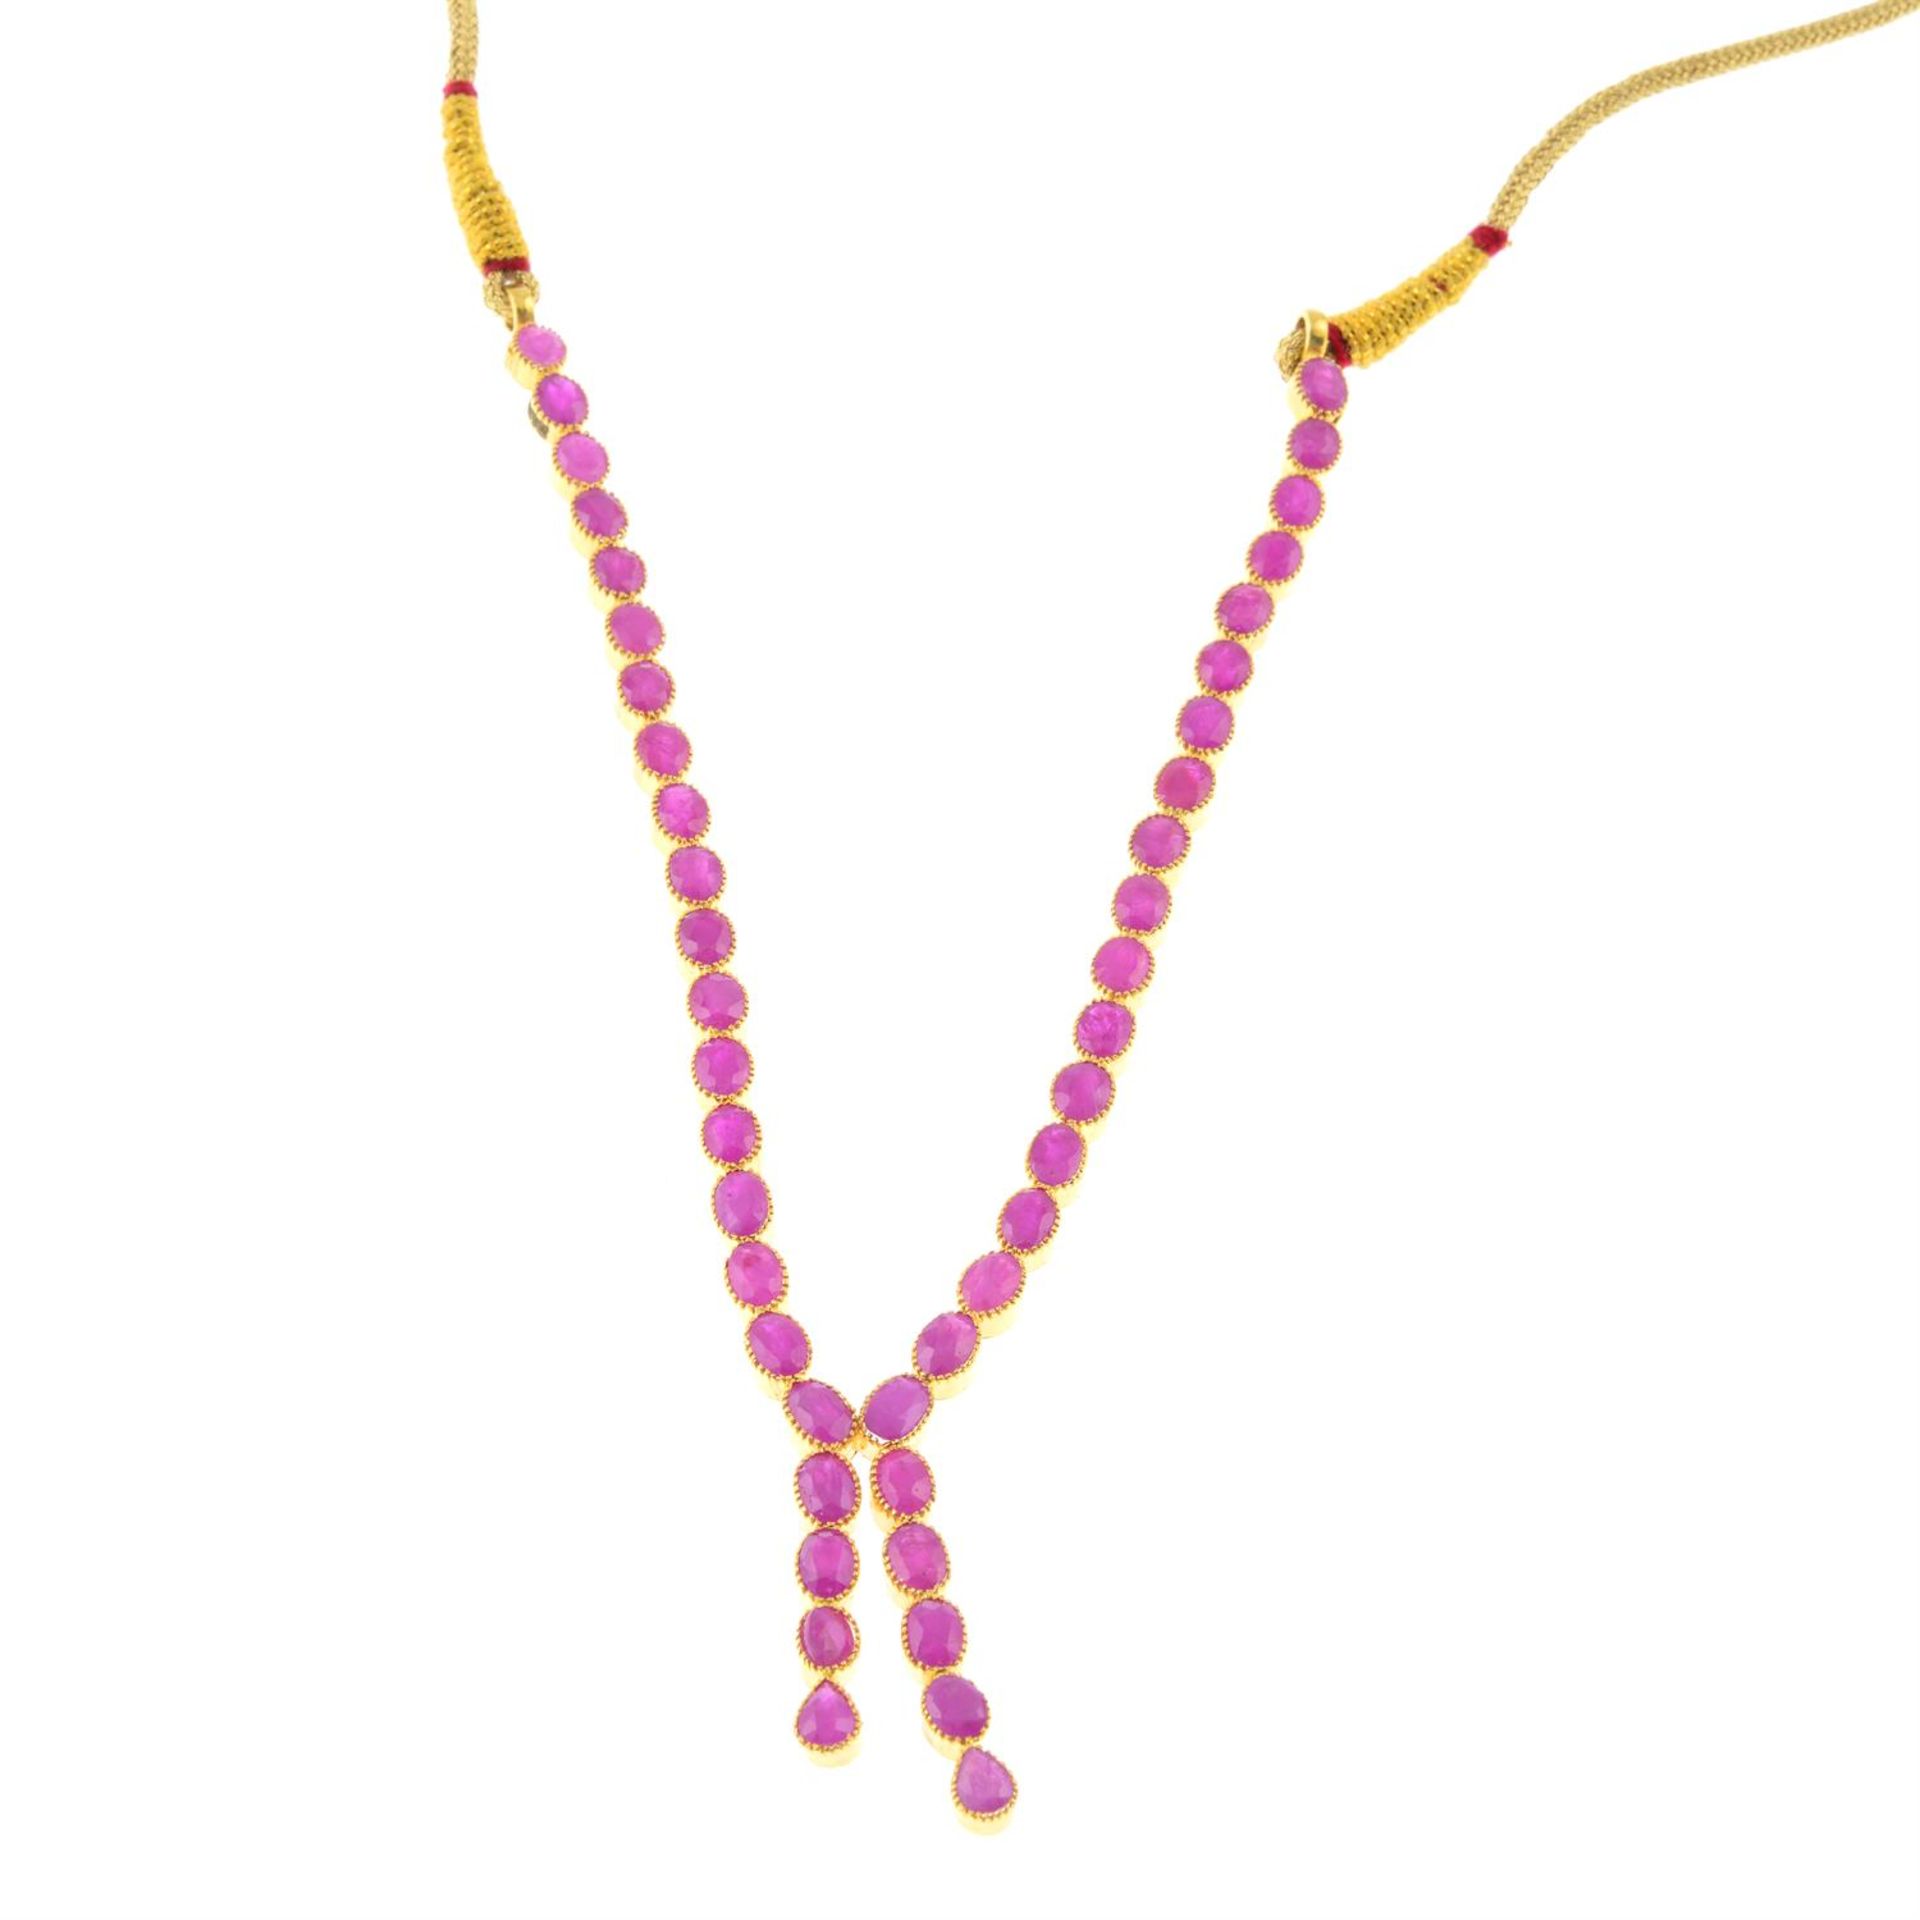 A ruby, imitation pearl and paste necklace with cord fastening.